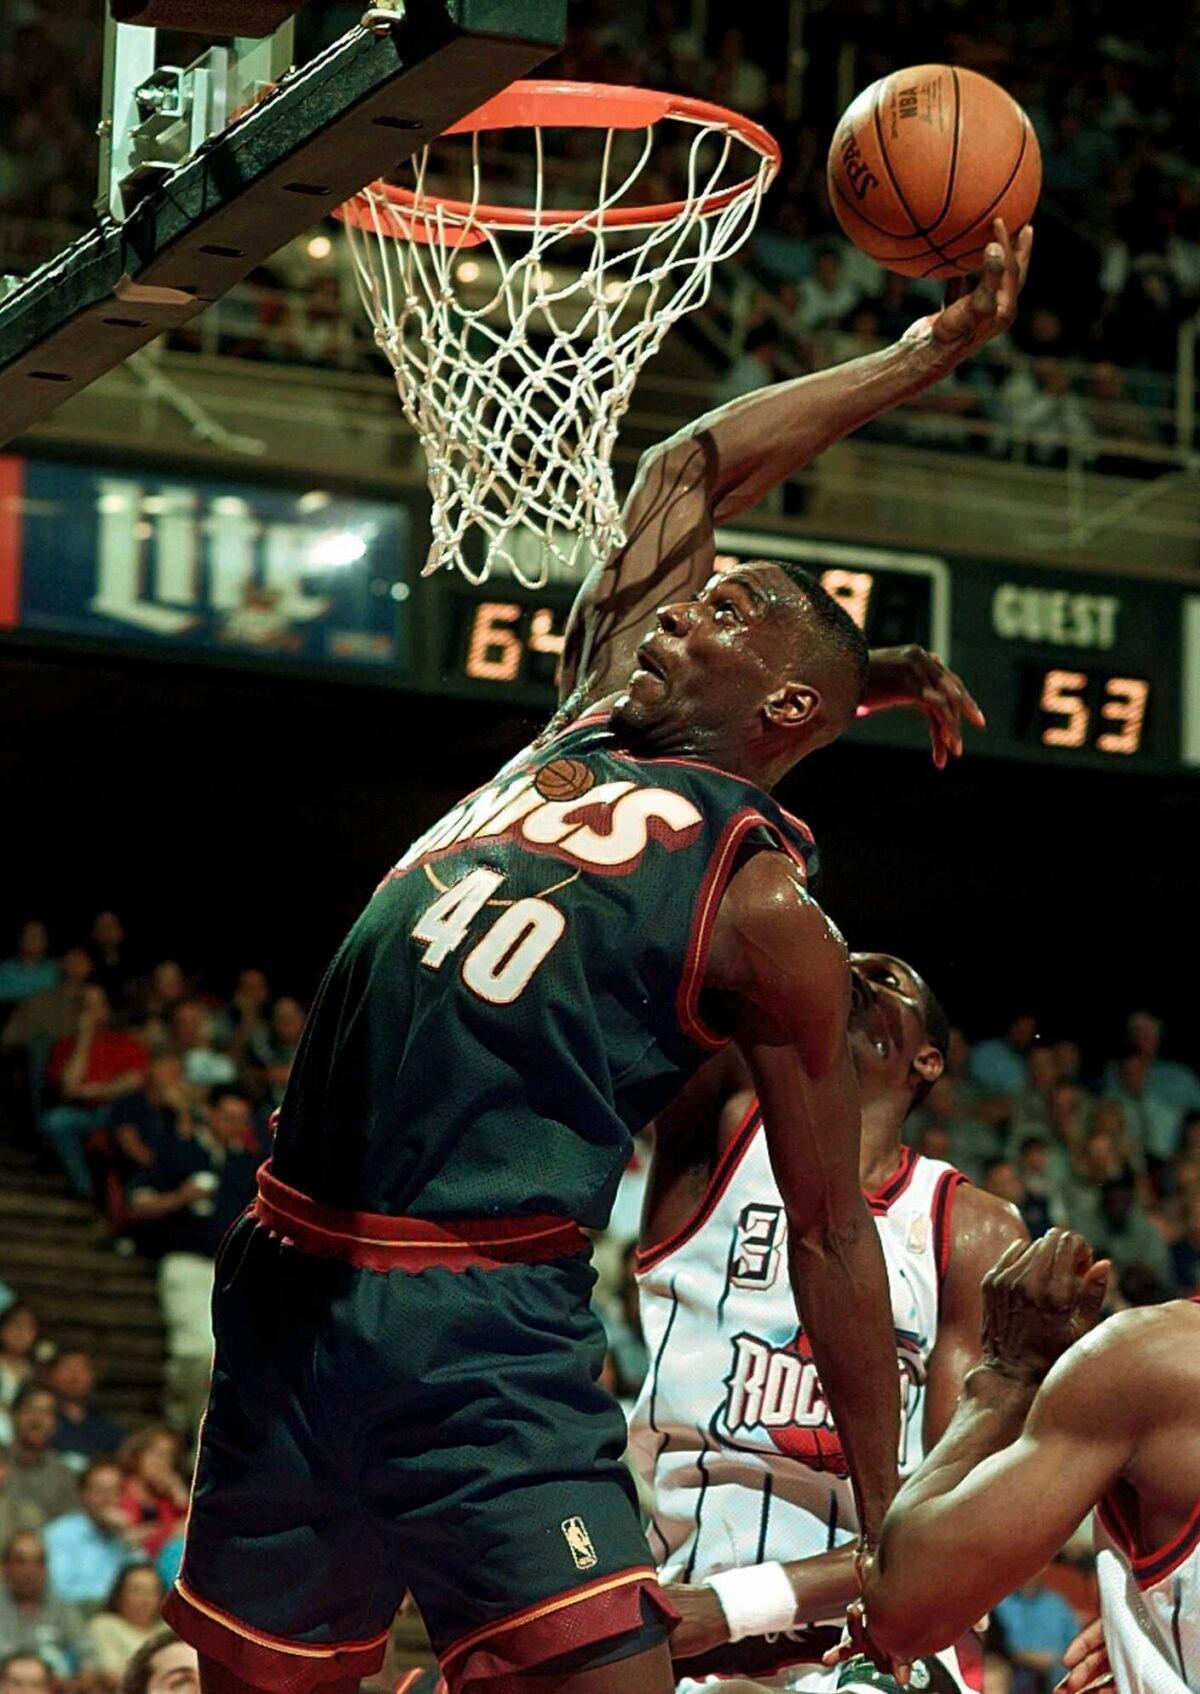 Seattle SuperSonics' Shawn Kemp (40) goes in for a dunk as Houston Rockets' Hakeem Olajuwon (34) defends during the second quarter of their NBA playoff game in Houston on May 5, 1997. (Pat Sullivan/AP Photo)